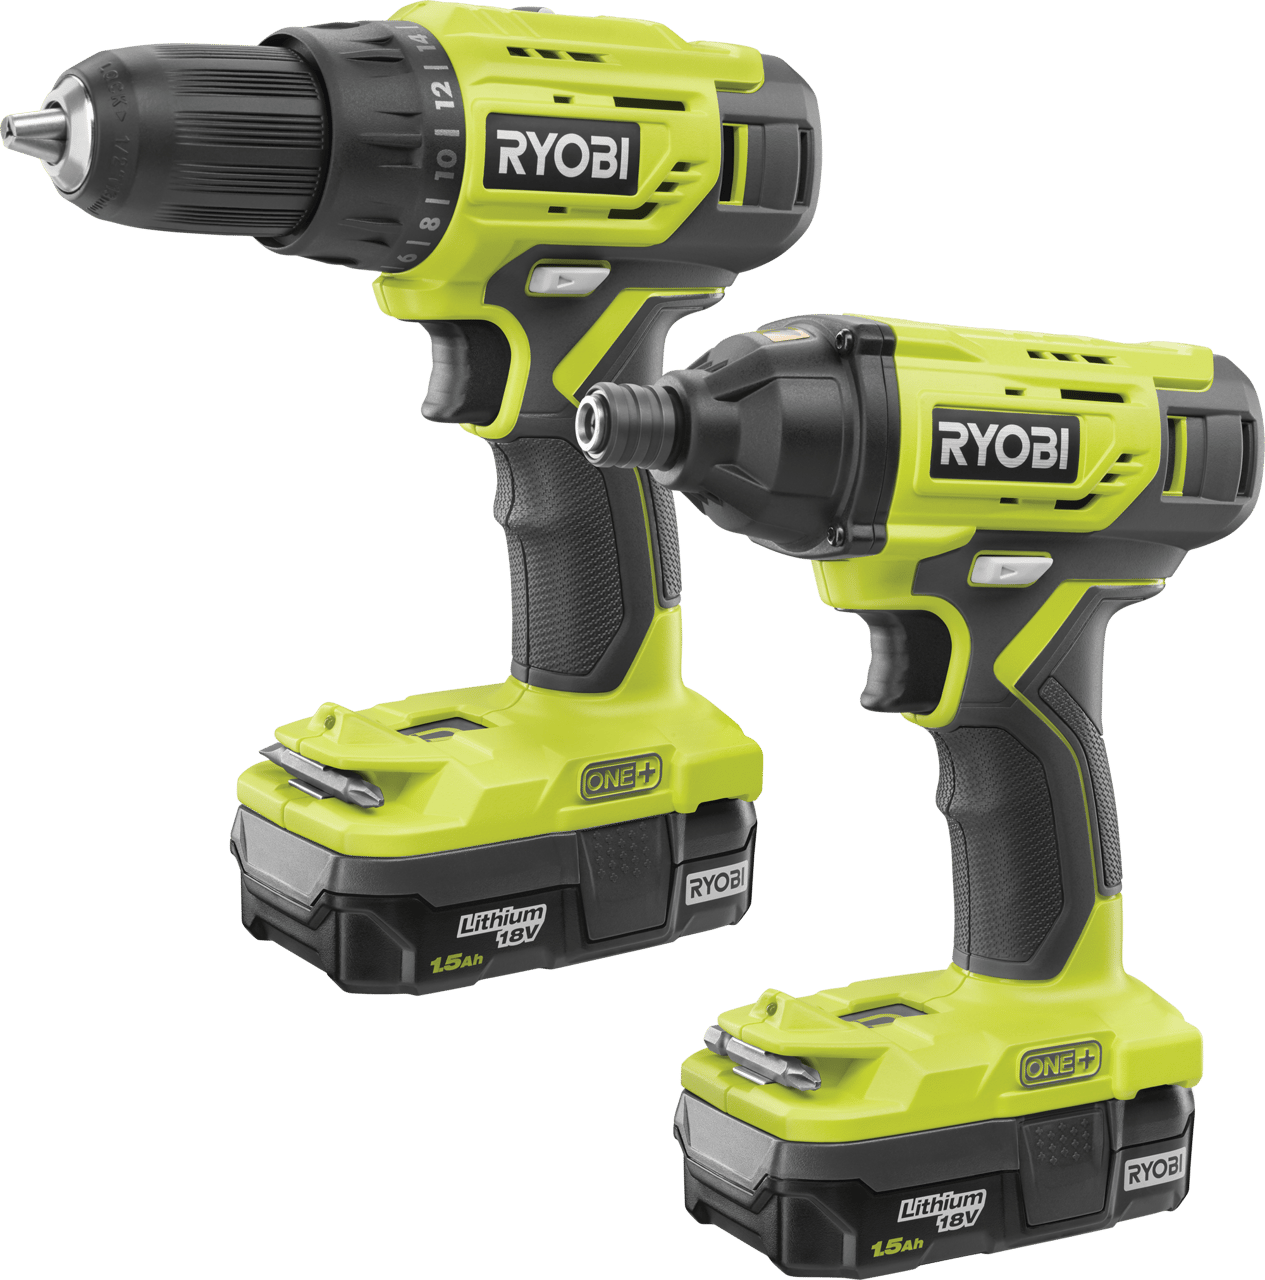 Handheld power drill, Pneumatic tool, Impact wrench, Green, Product, Yellow